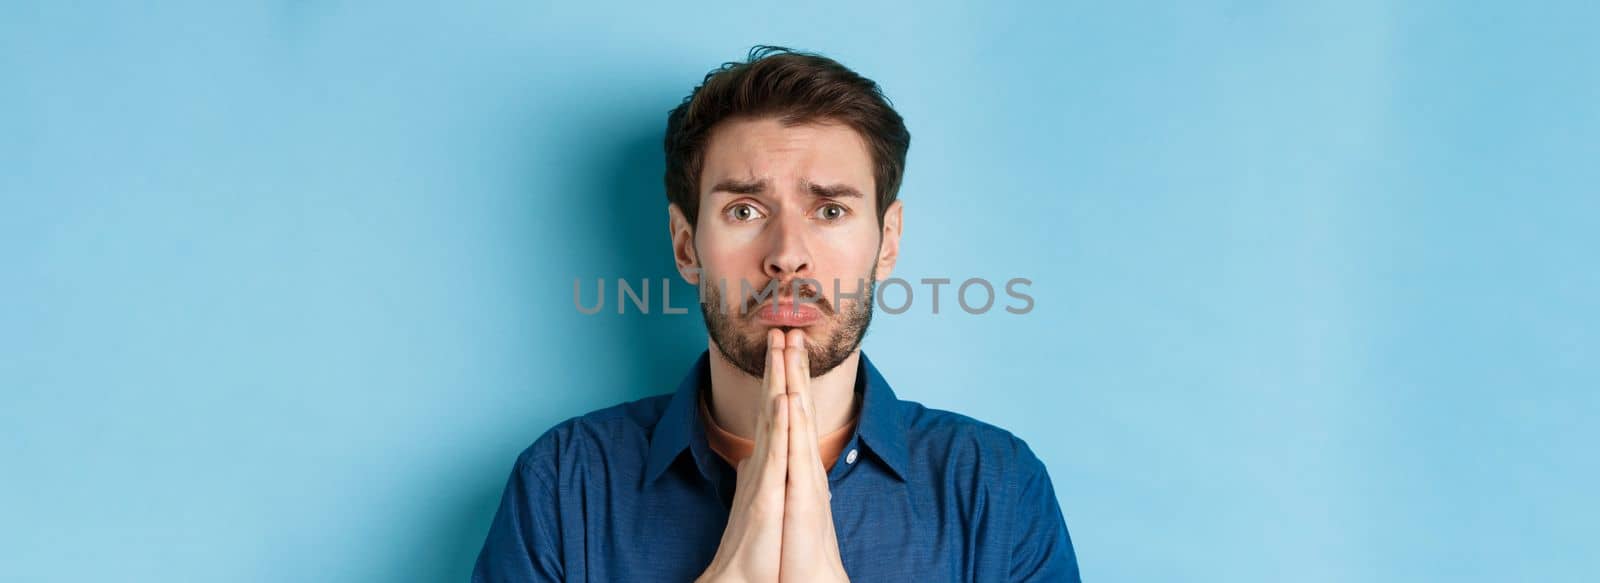 Sad young man begging for help, apoligizing and sobbing miserable, standing on blue background.